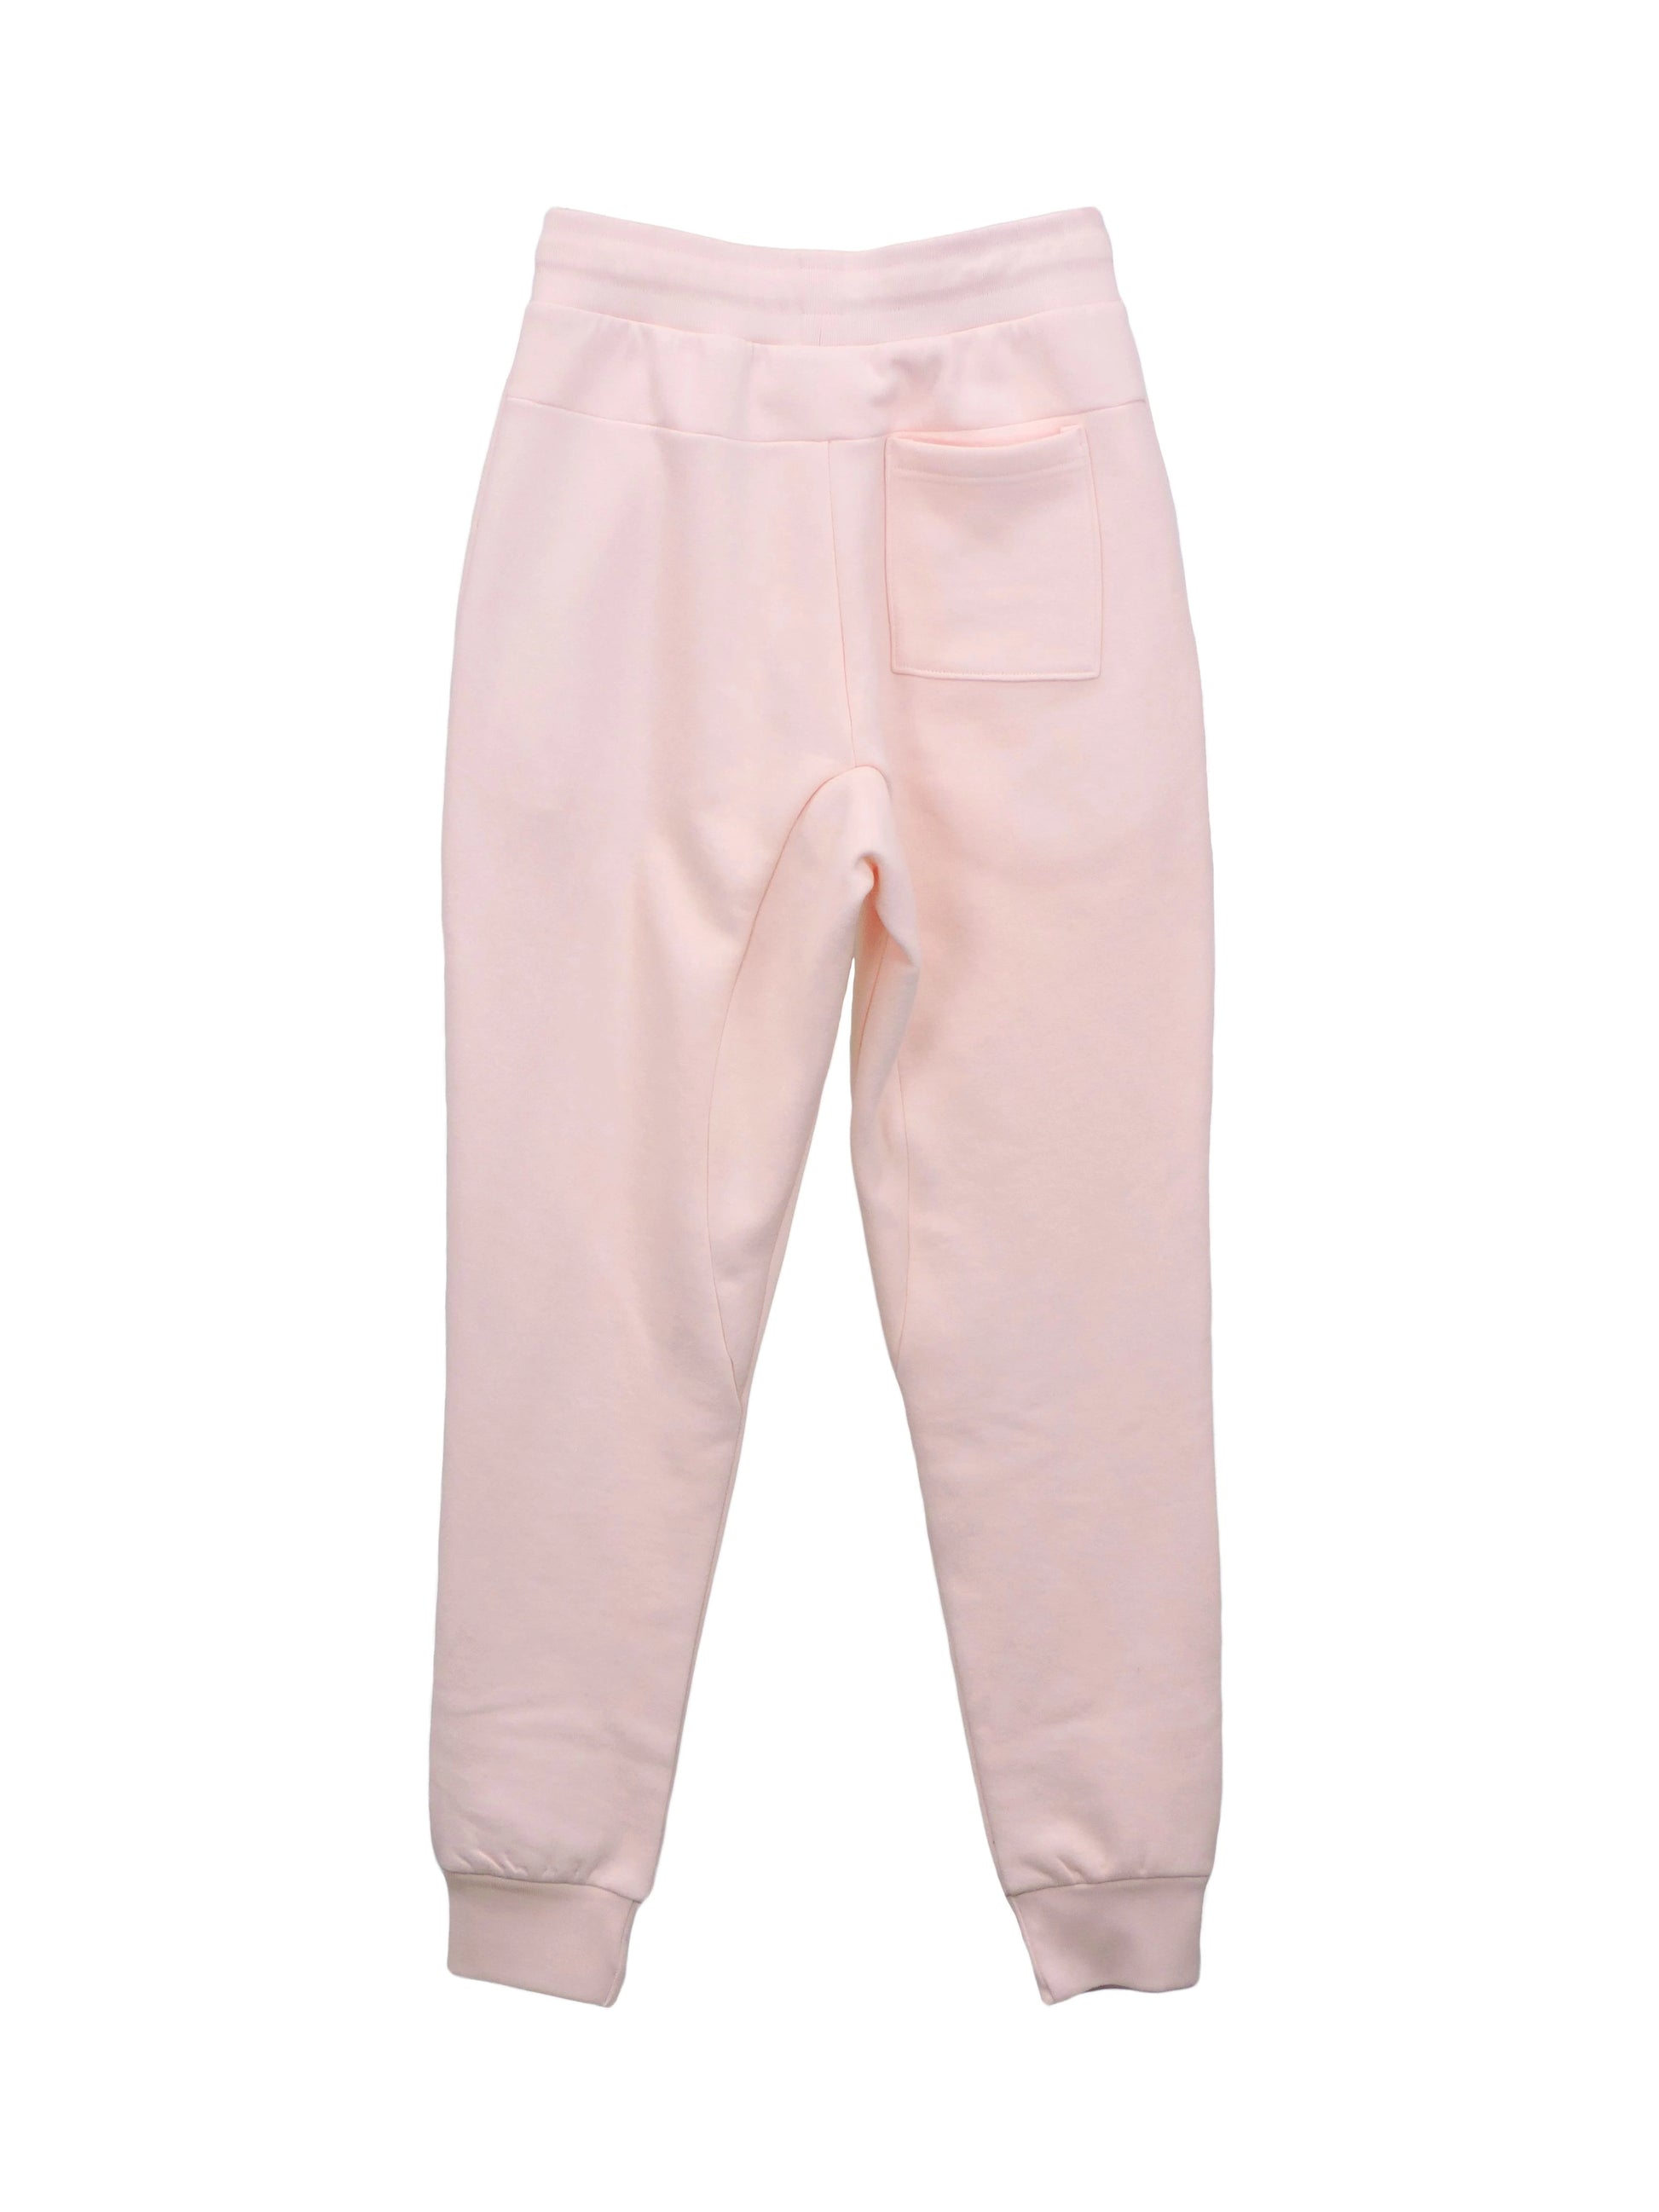 Back of Pale Pink Fleece Jogger, Fitted Ankles and Single Backpocket